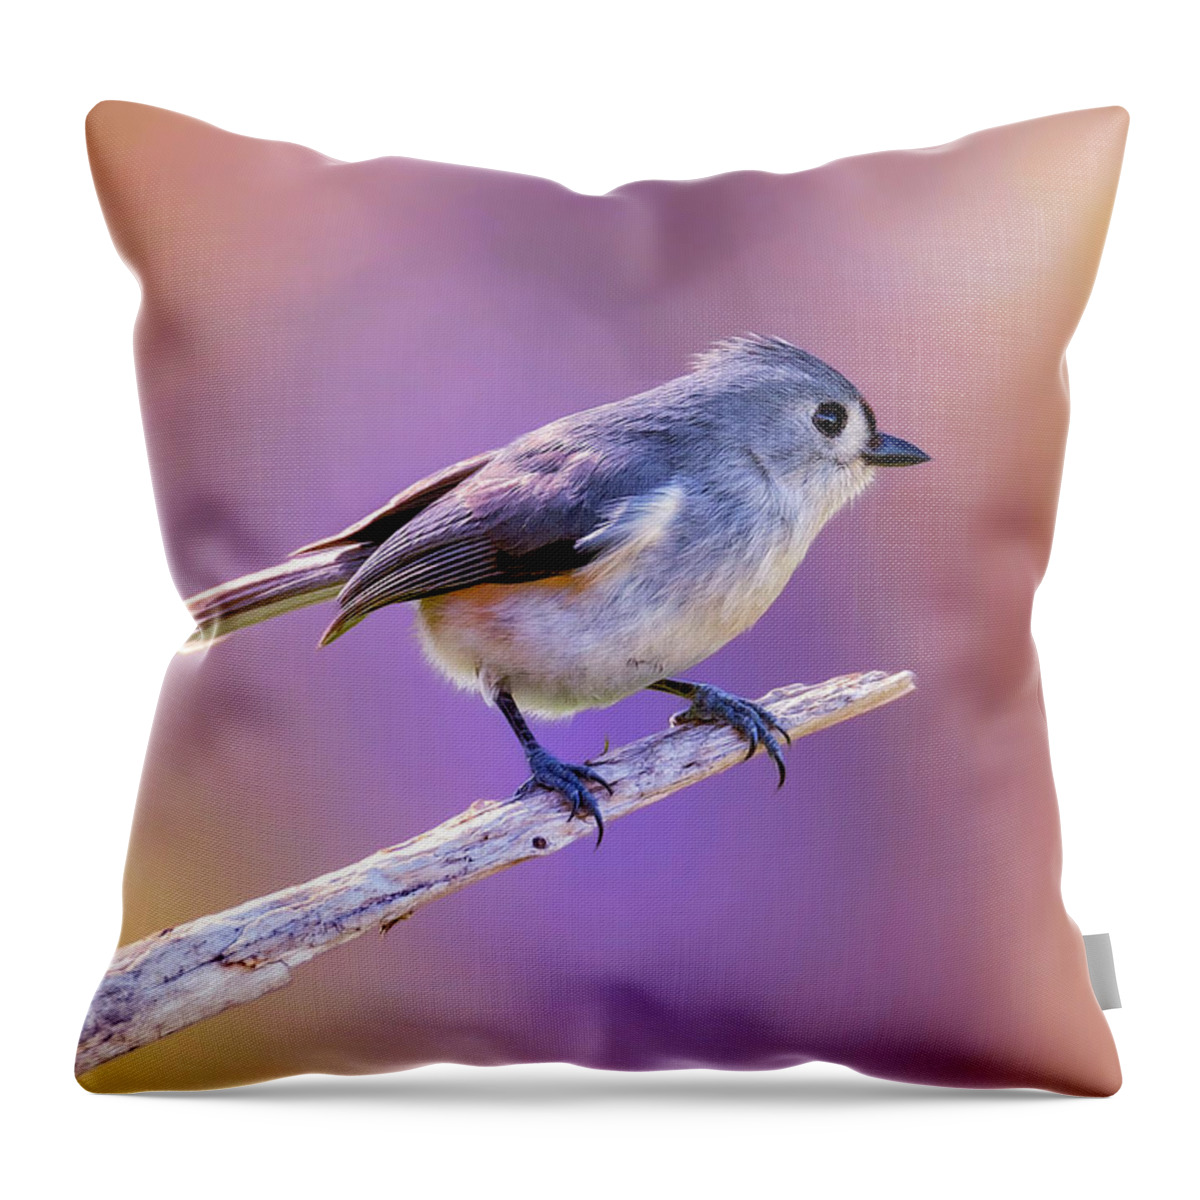 Bird Throw Pillow featuring the photograph Tit On Violet by Bill and Linda Tiepelman